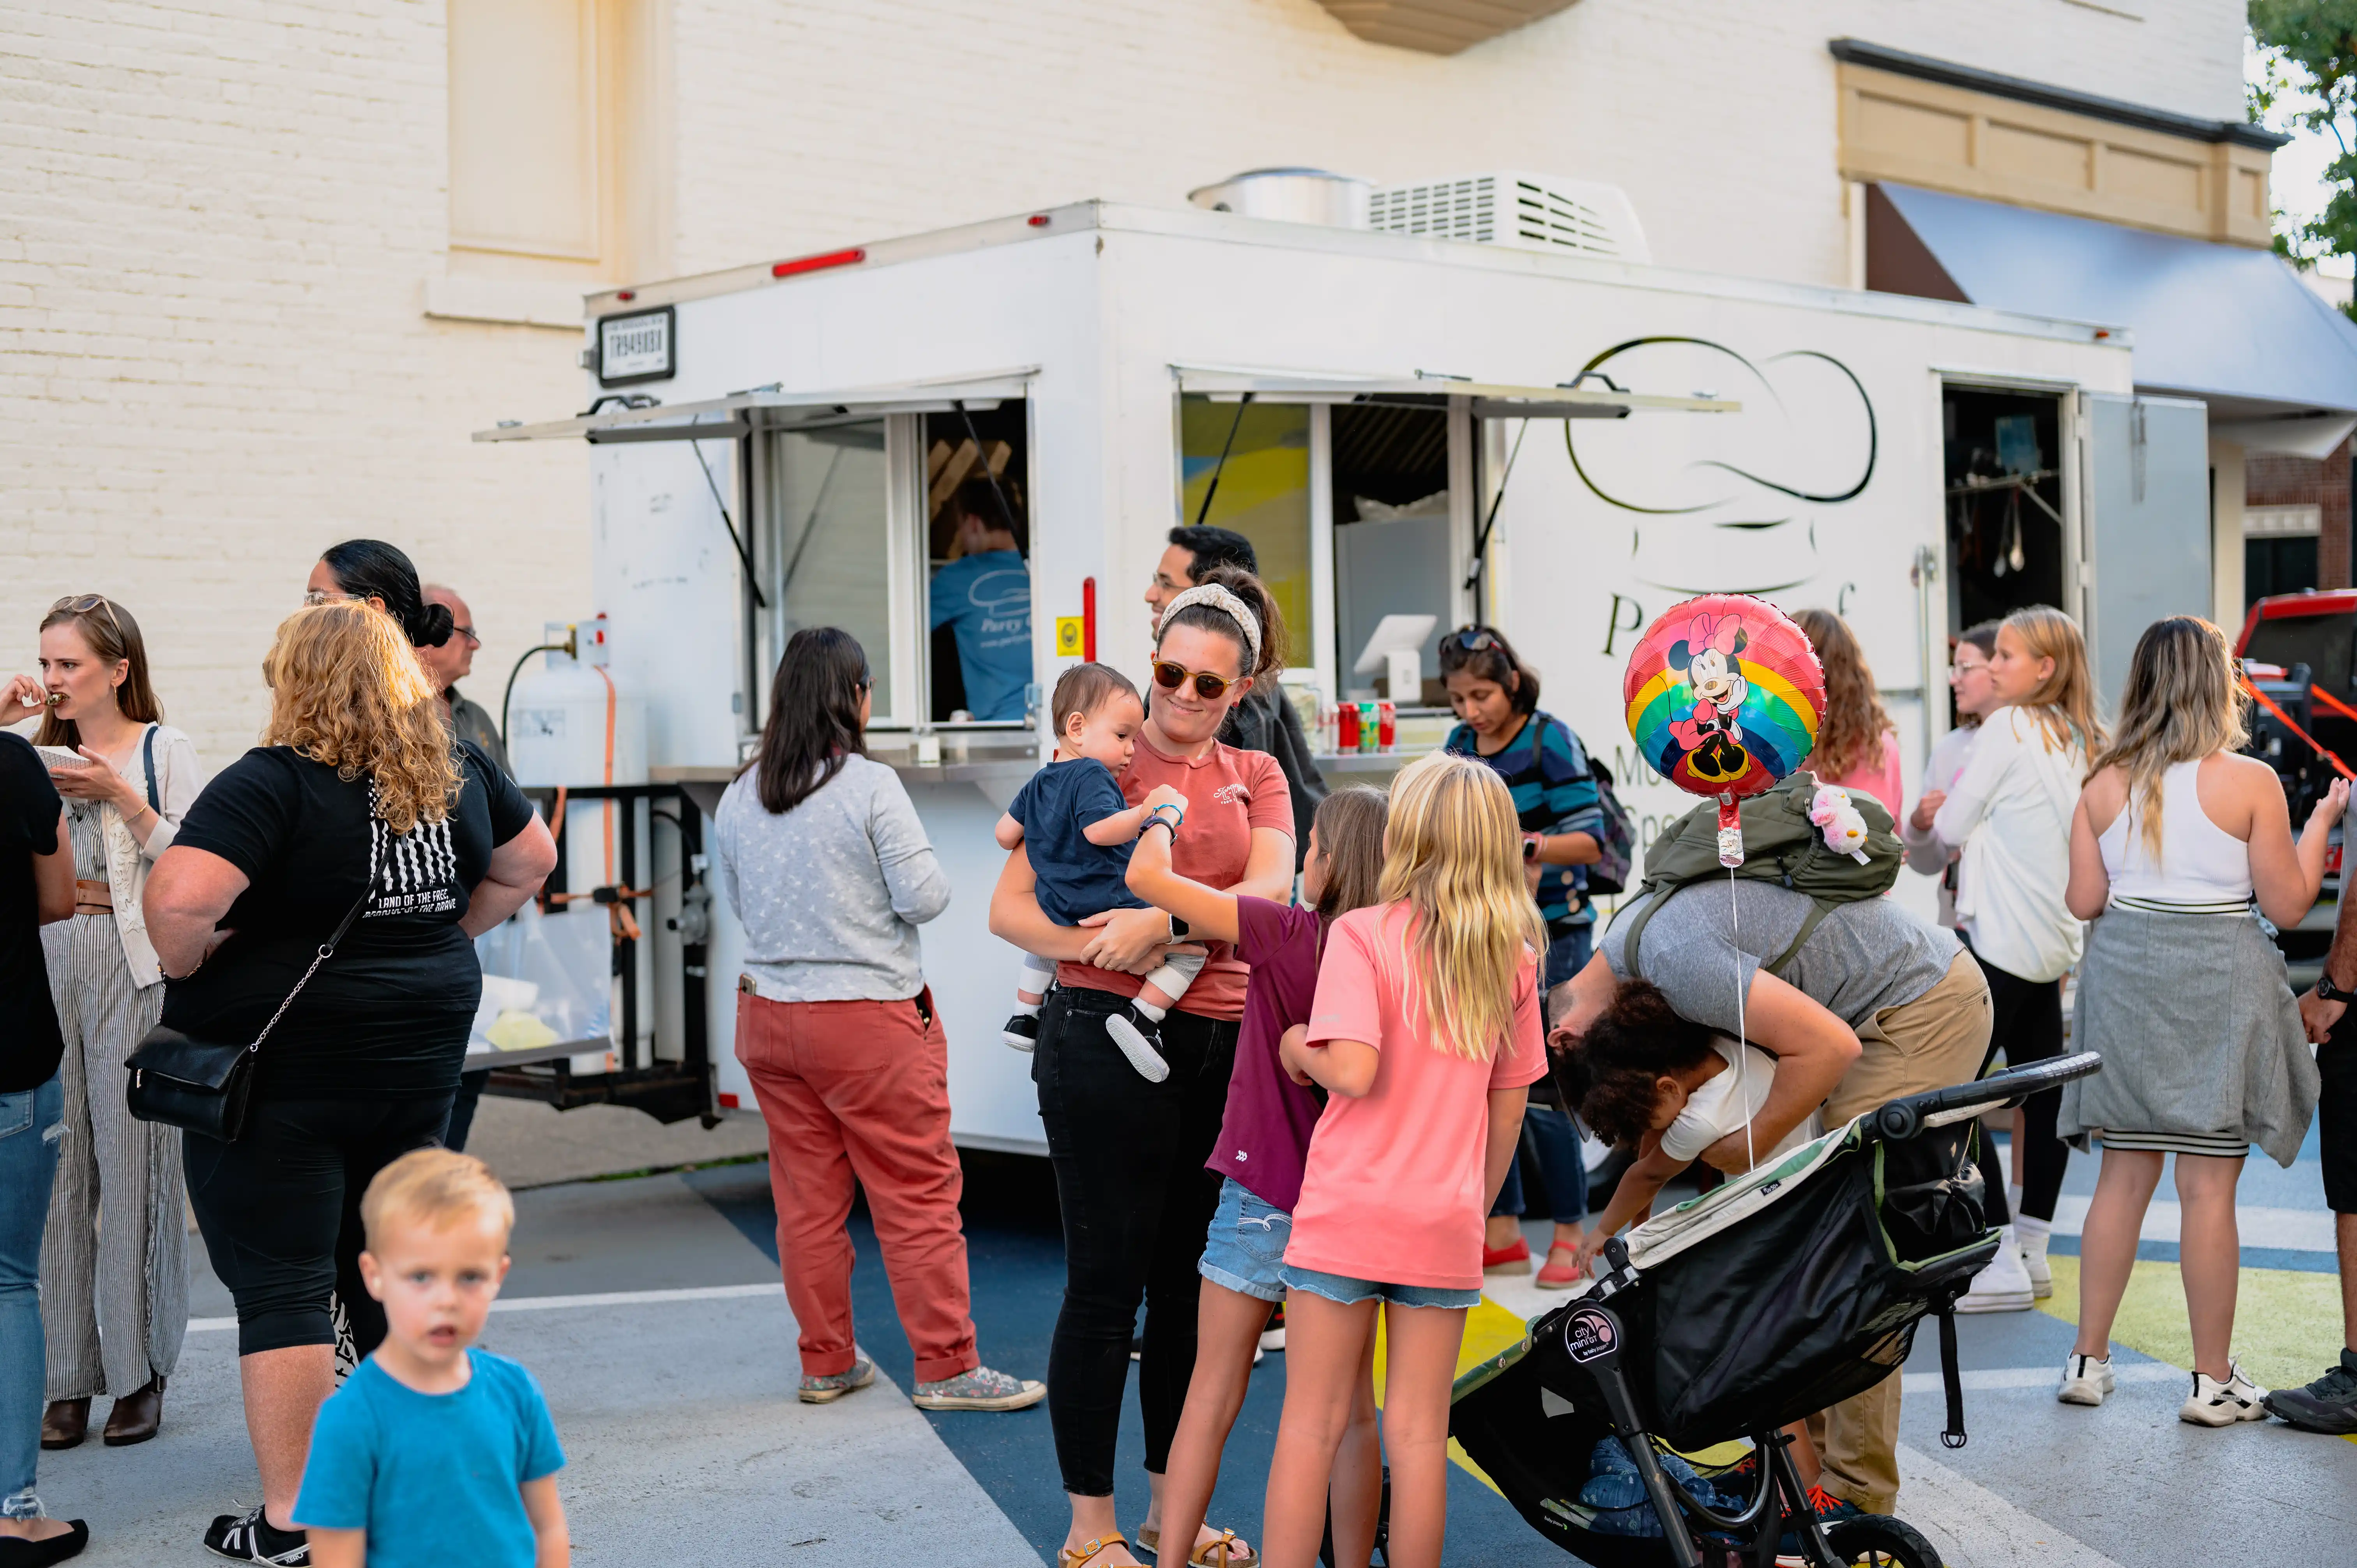 A bustling street food scene with people waiting in line at a food truck, talking and enjoying the atmosphere, some with children and strollers.